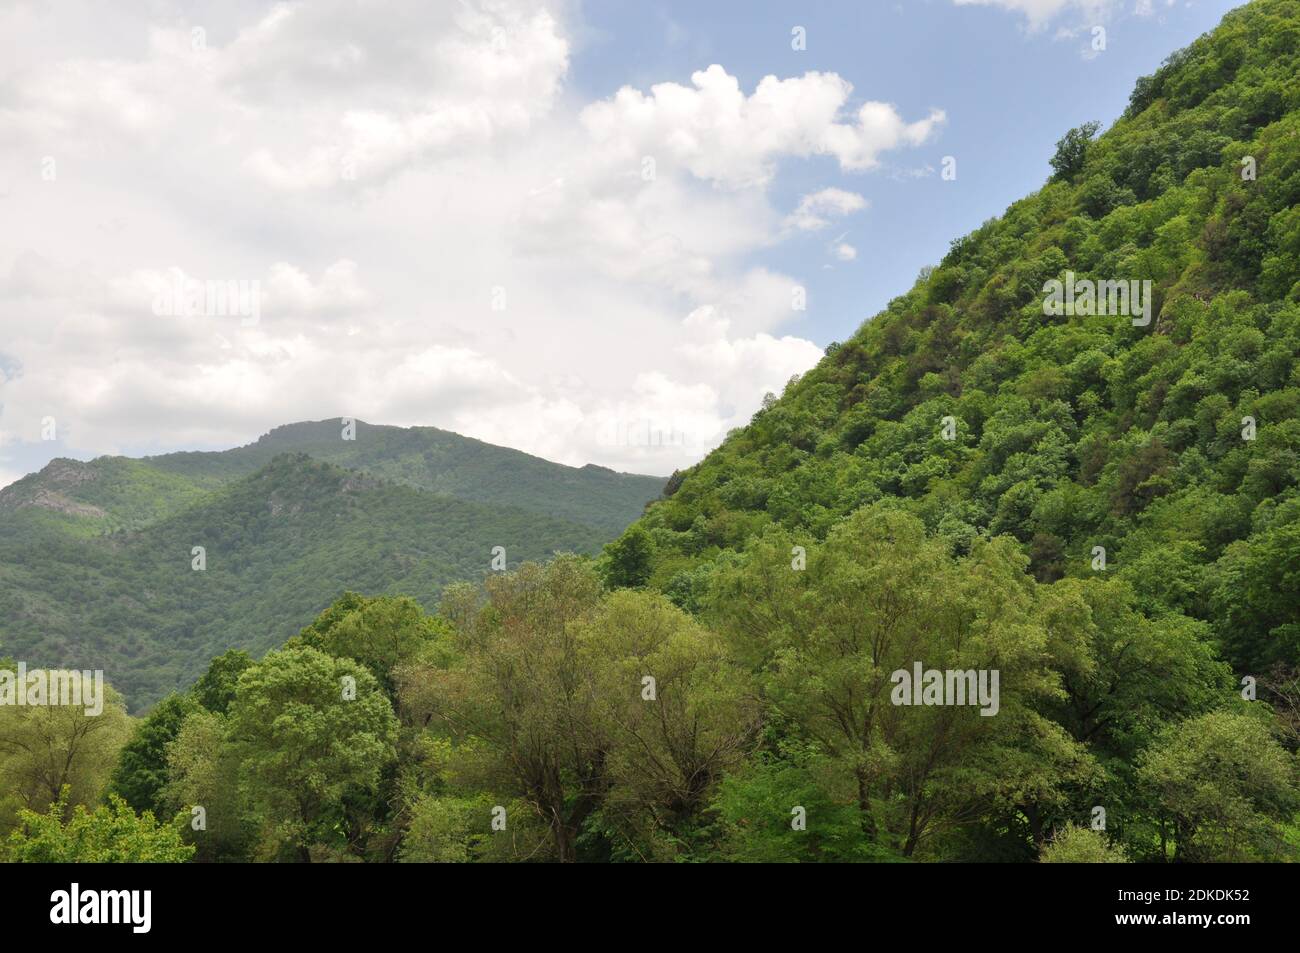 Green forest hills under cloudy sky in Tavush province Armenia Stock Photo